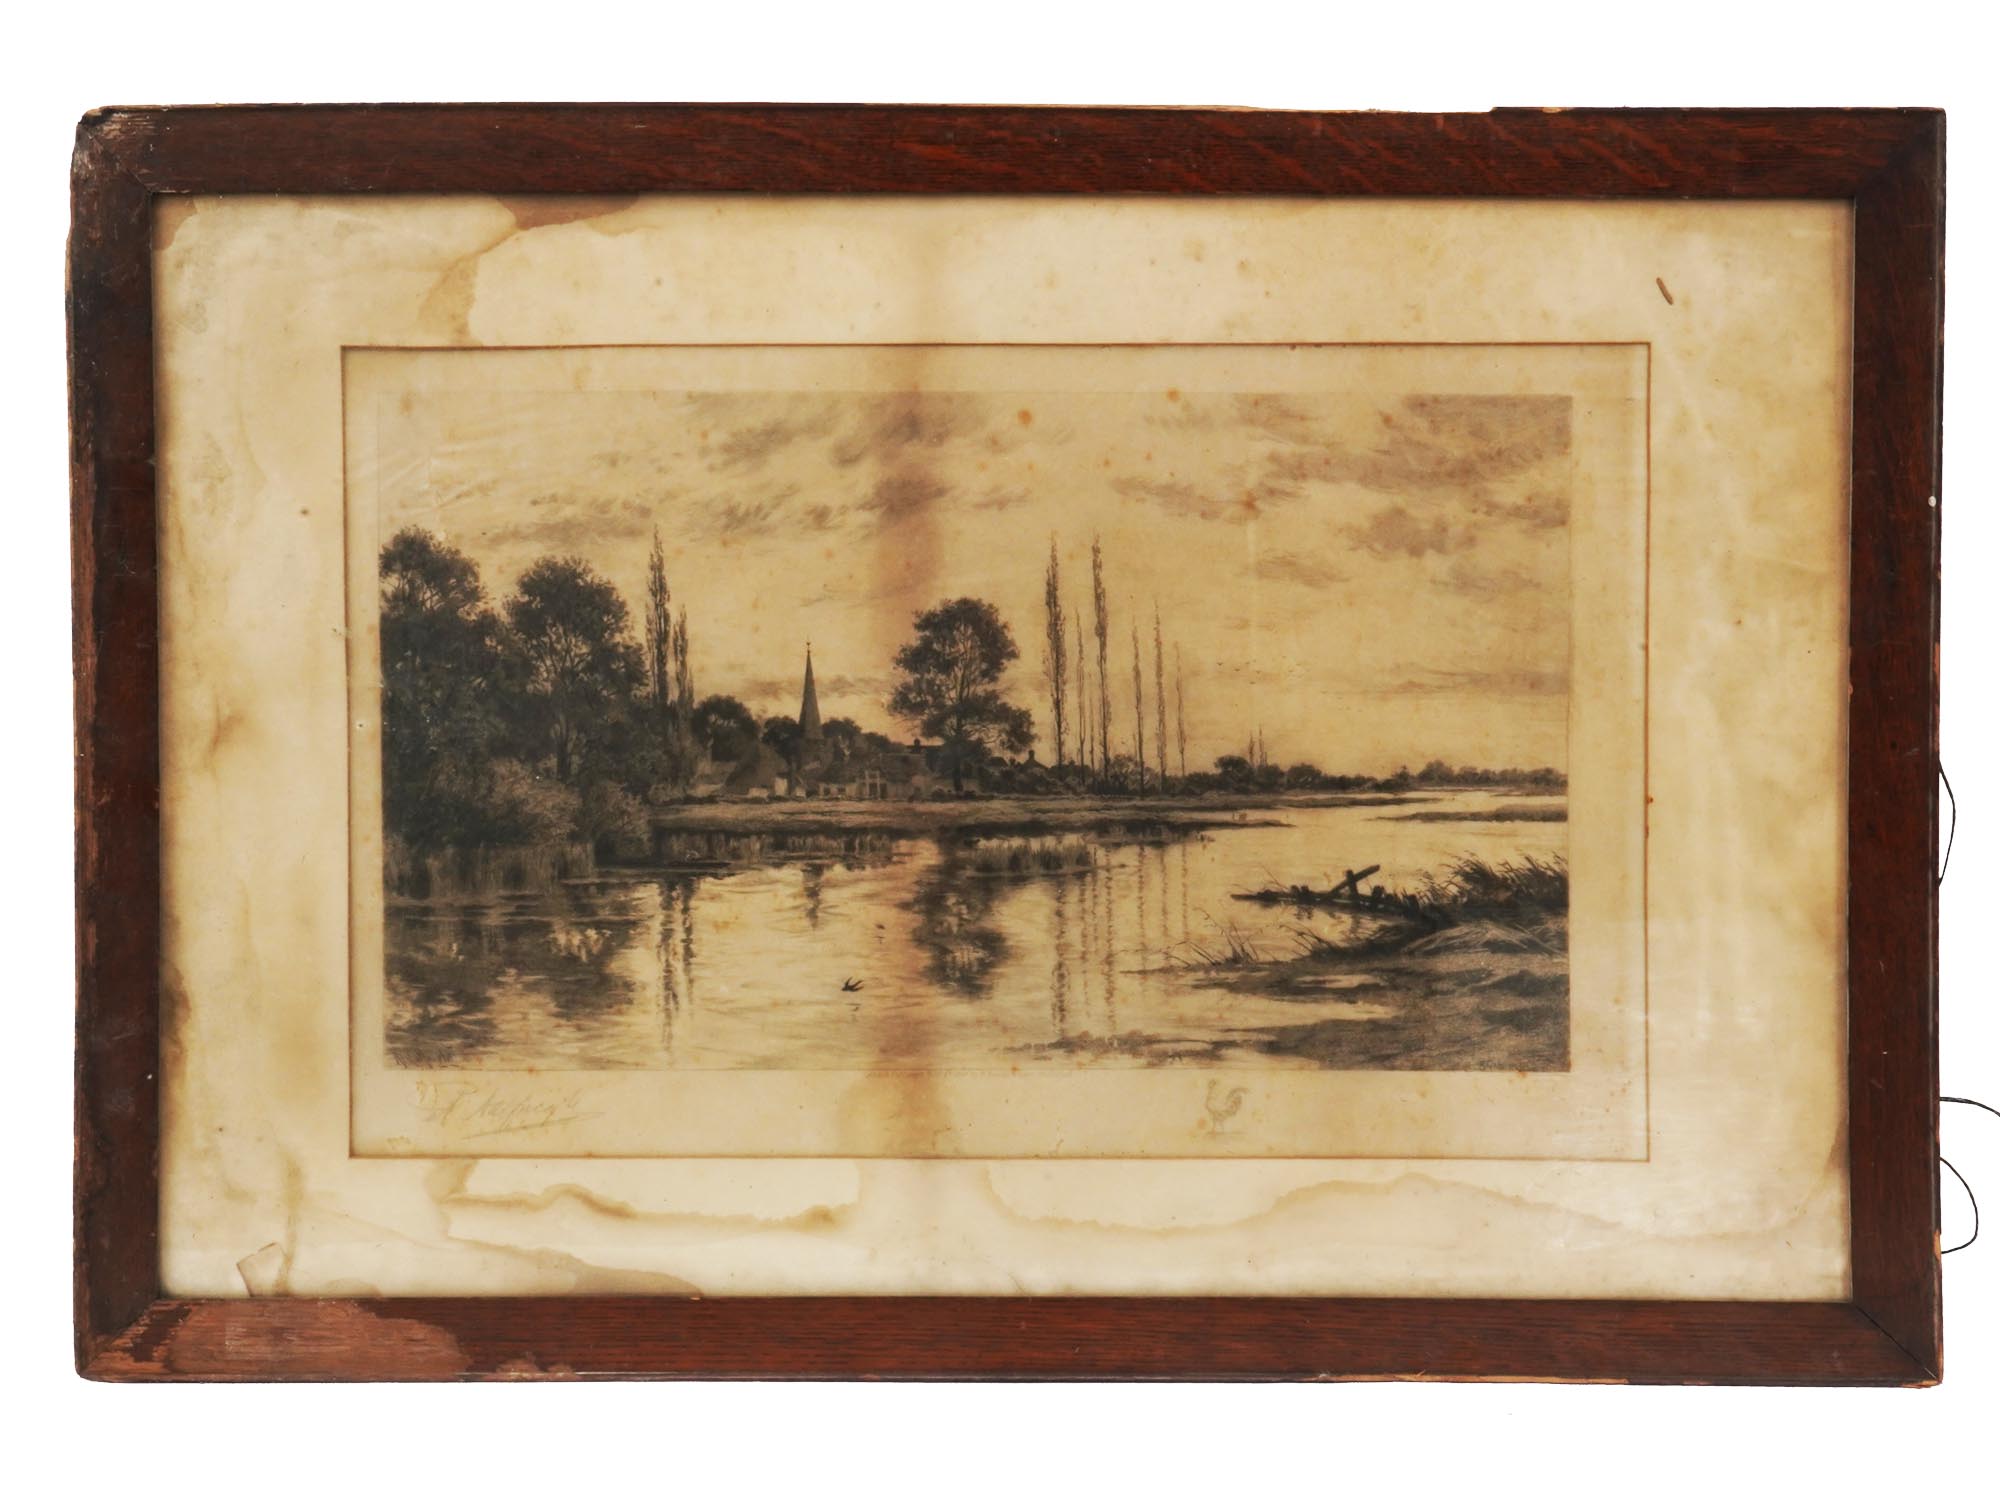 ANTIQUE LANDSCAPE ETCHING BY RICHARD HALFKNIGHT PIC-0